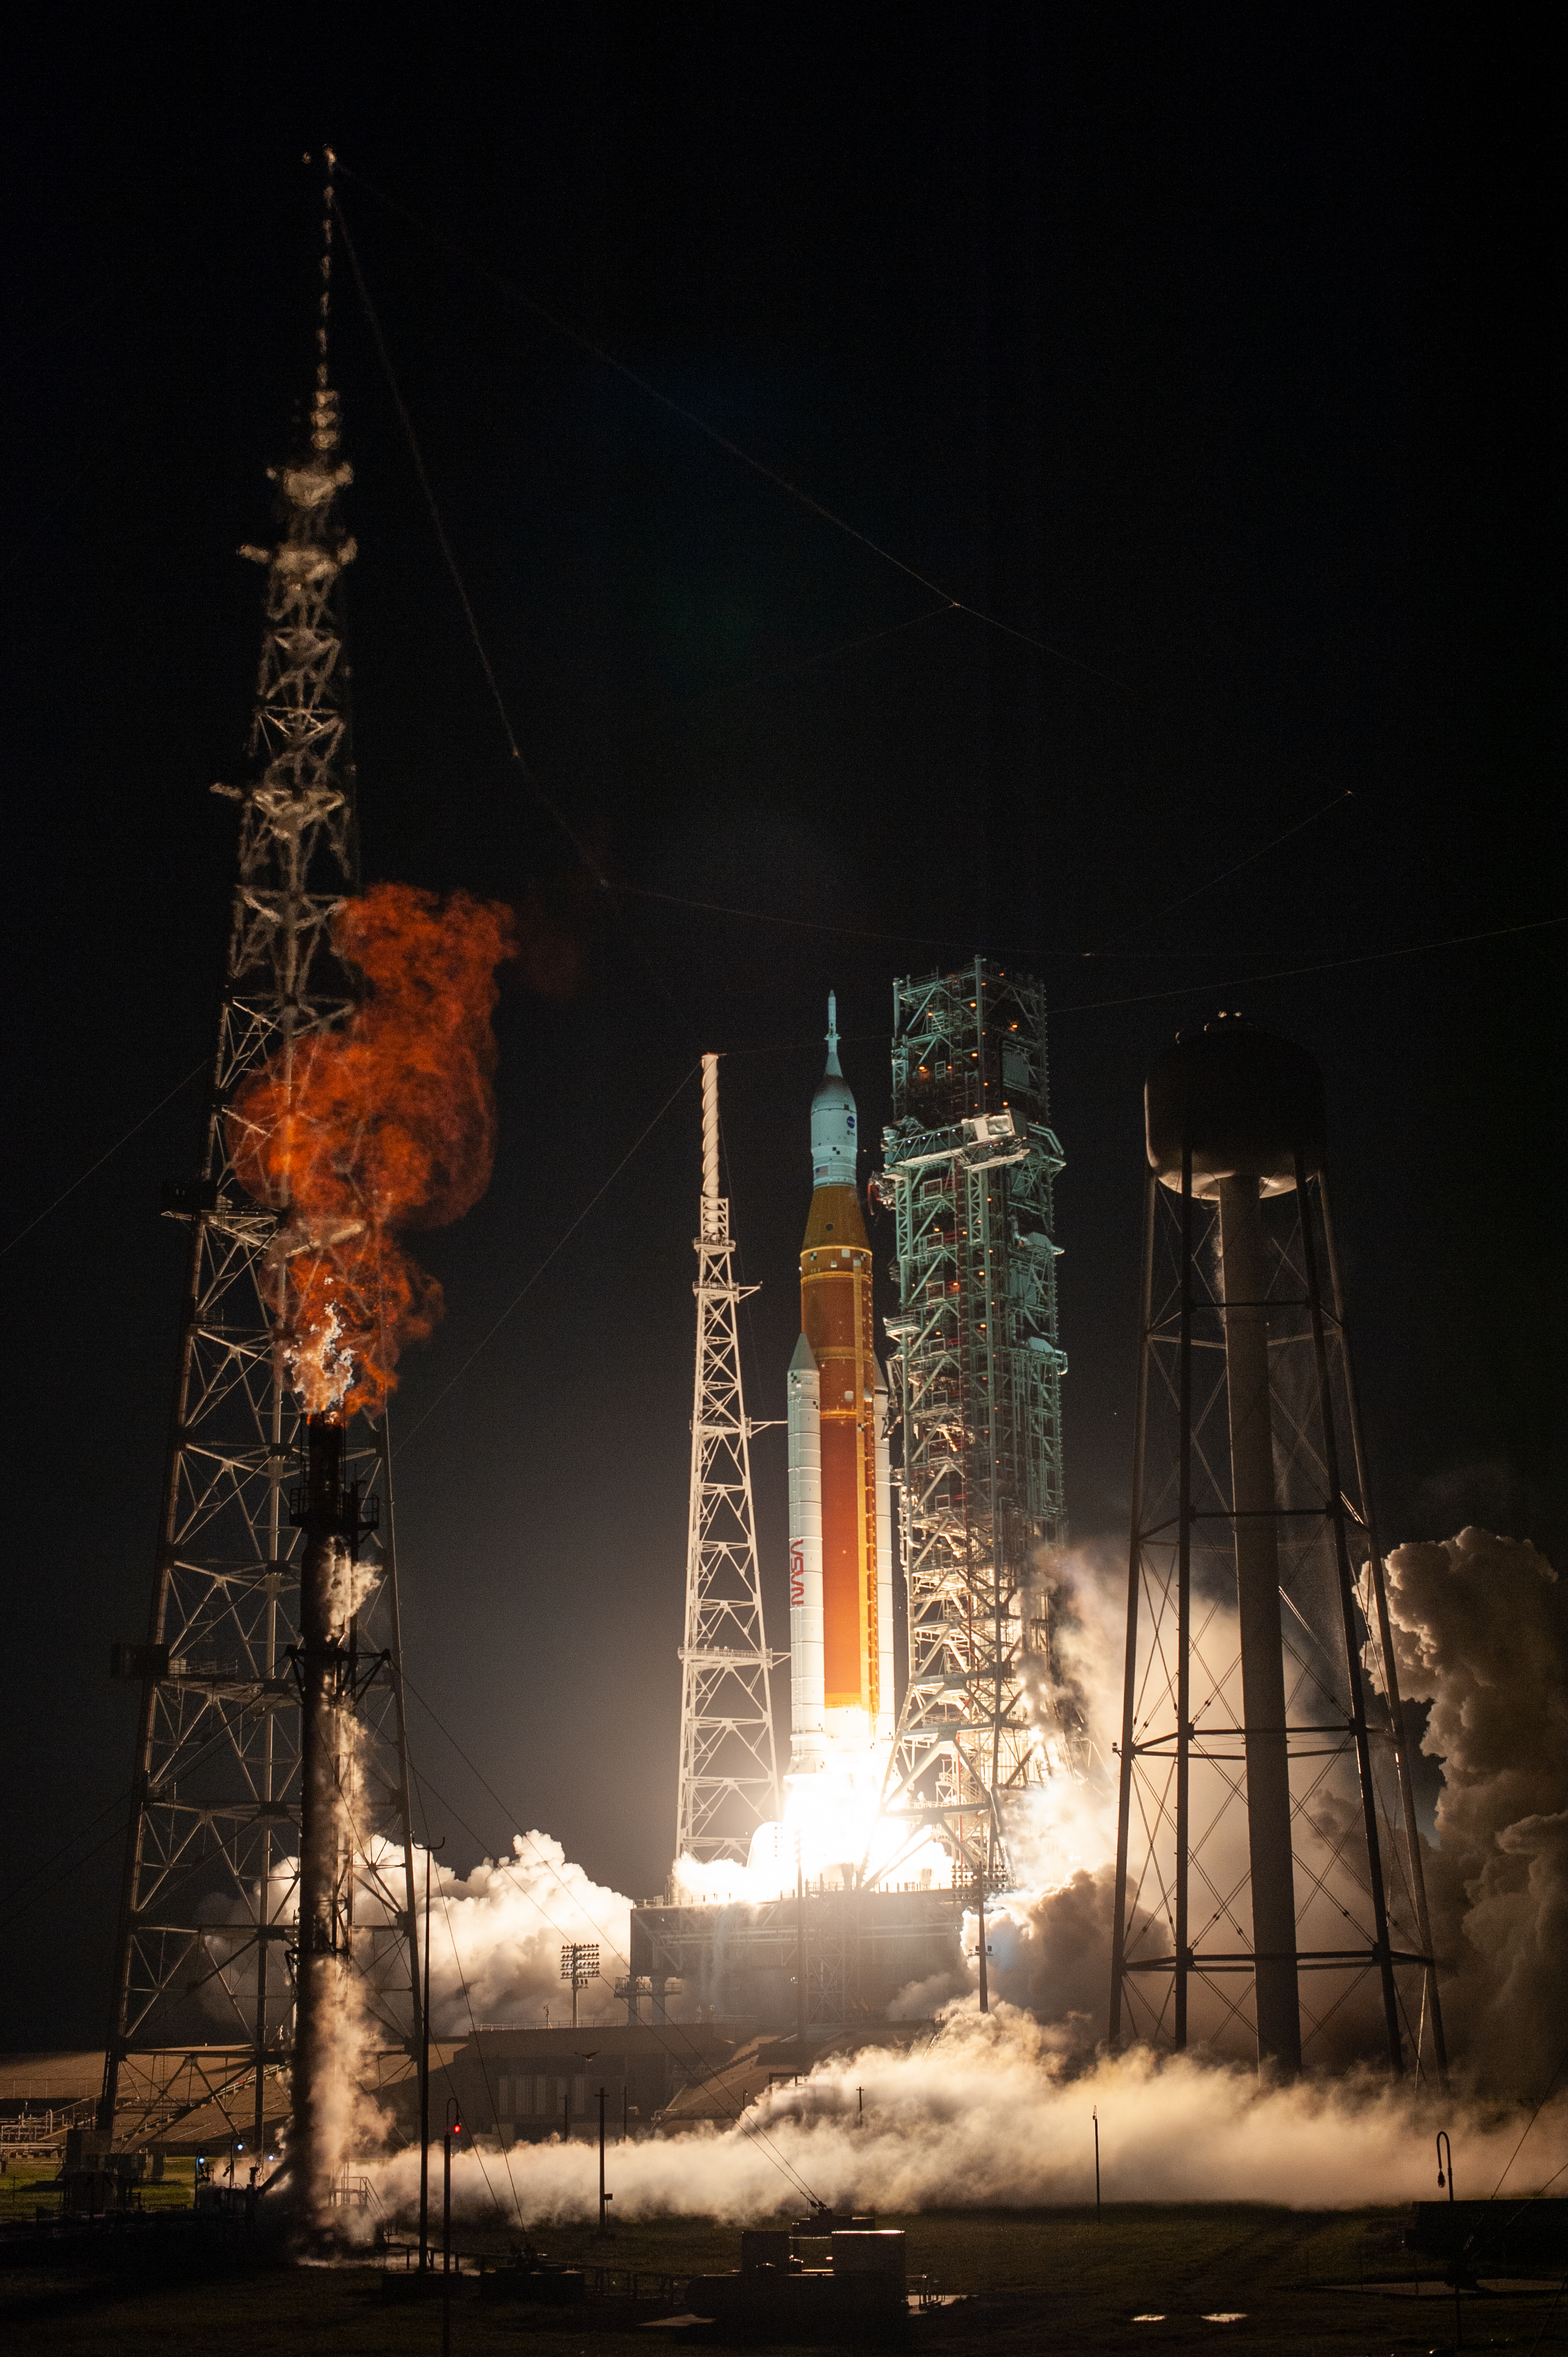 NASA's Space Launch System lifts off from the launch pad, illuminating the ground with a bright white light that bounces off of clouds of smoke. Pictured on the left side of this image is the liquid hydrogen "flare stack" where vented liquid hydrogen is burned off safely.